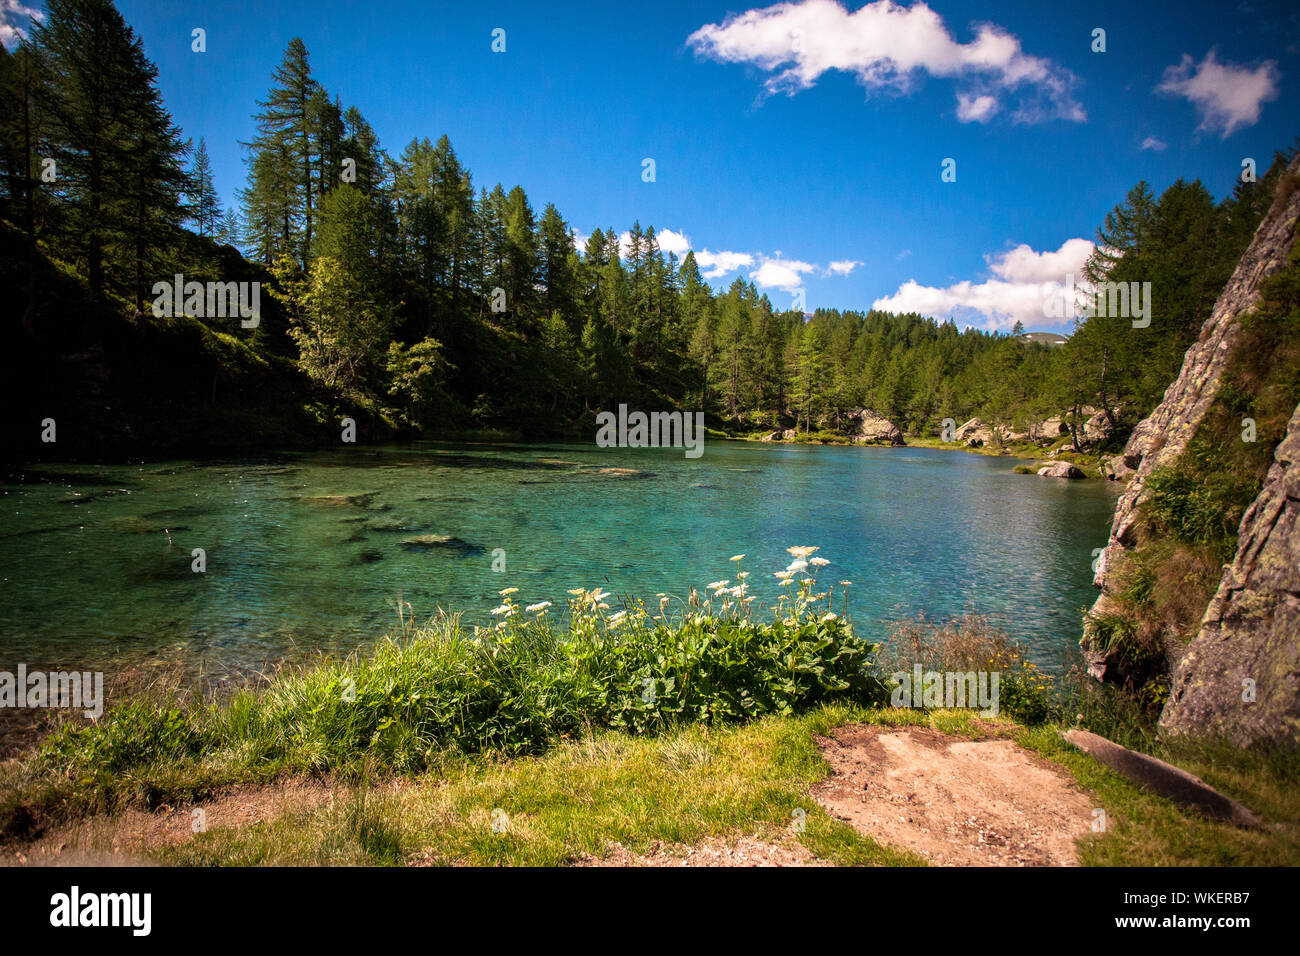 Disciplin dessert Uenighed Alpe Devero High Resolution Stock Photography and Images - Alamy